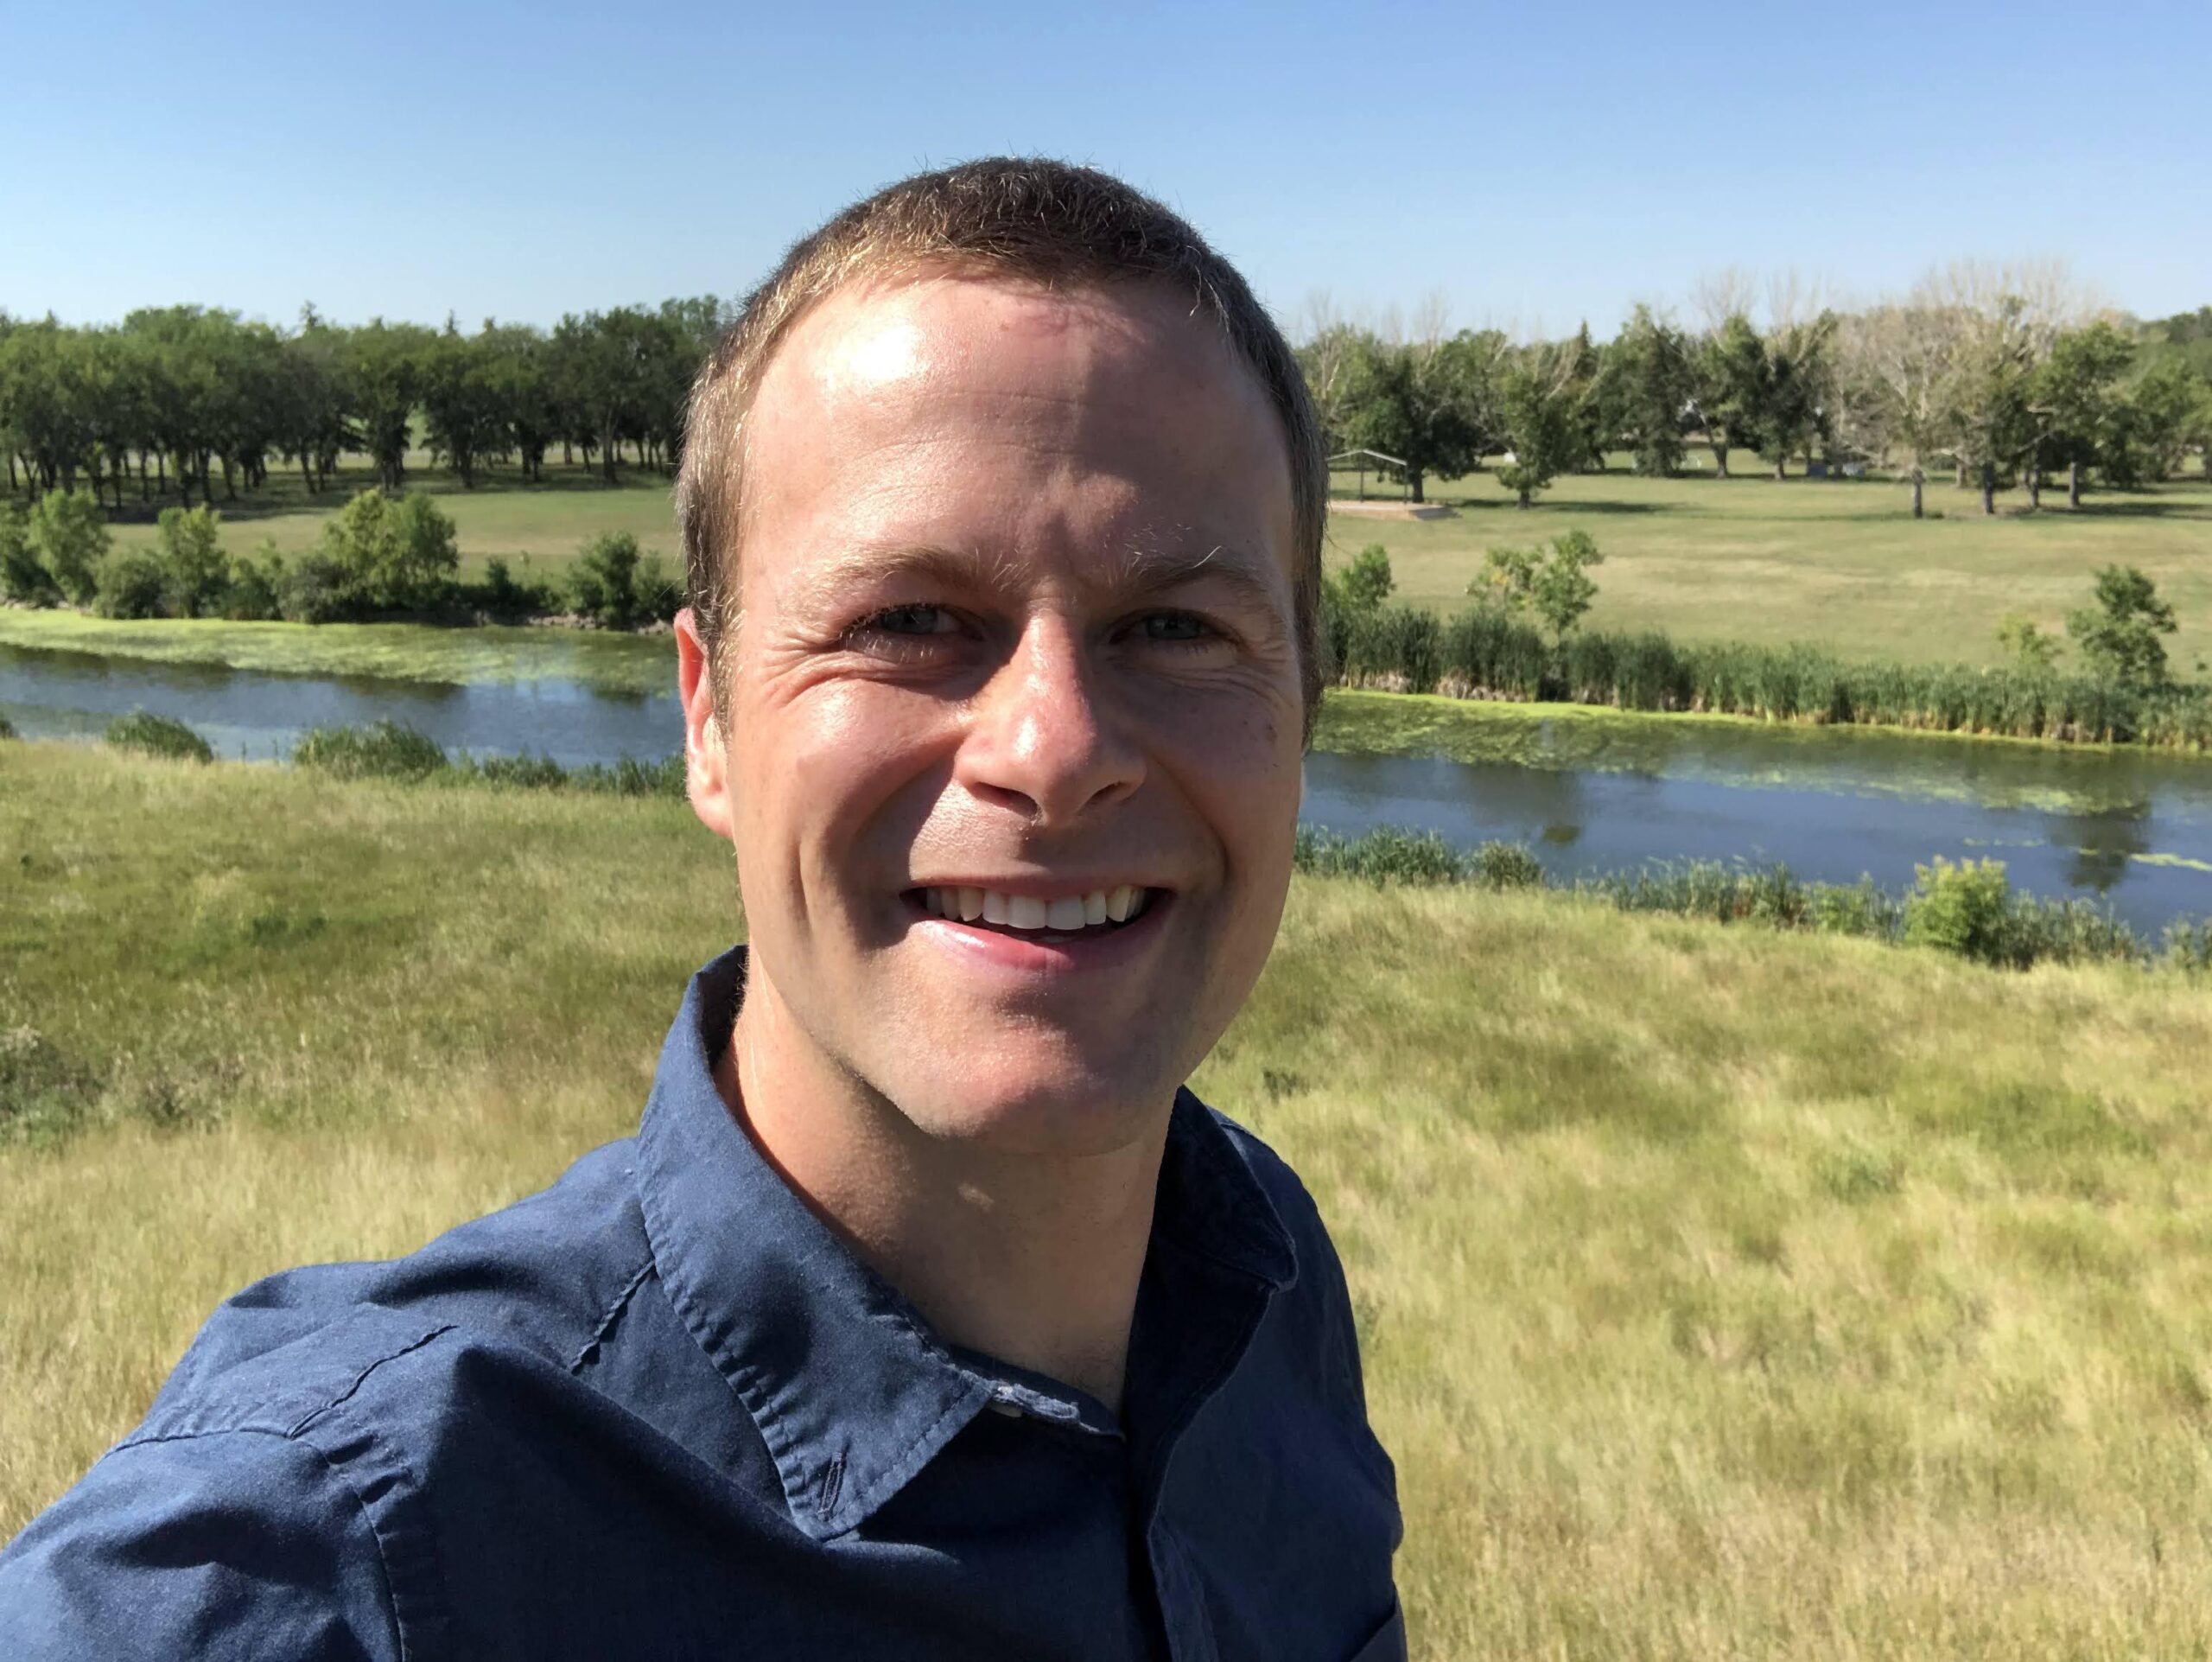 Rob Gosselin in his beloved great outdoors of Canada! He's grinning with real laugh lines around his eyes as though one or two of his many children are climbing up his legs while he's trying to take this selfie. The grasses are green behind him, the landscape includes a calm river and a dark far line of trees.